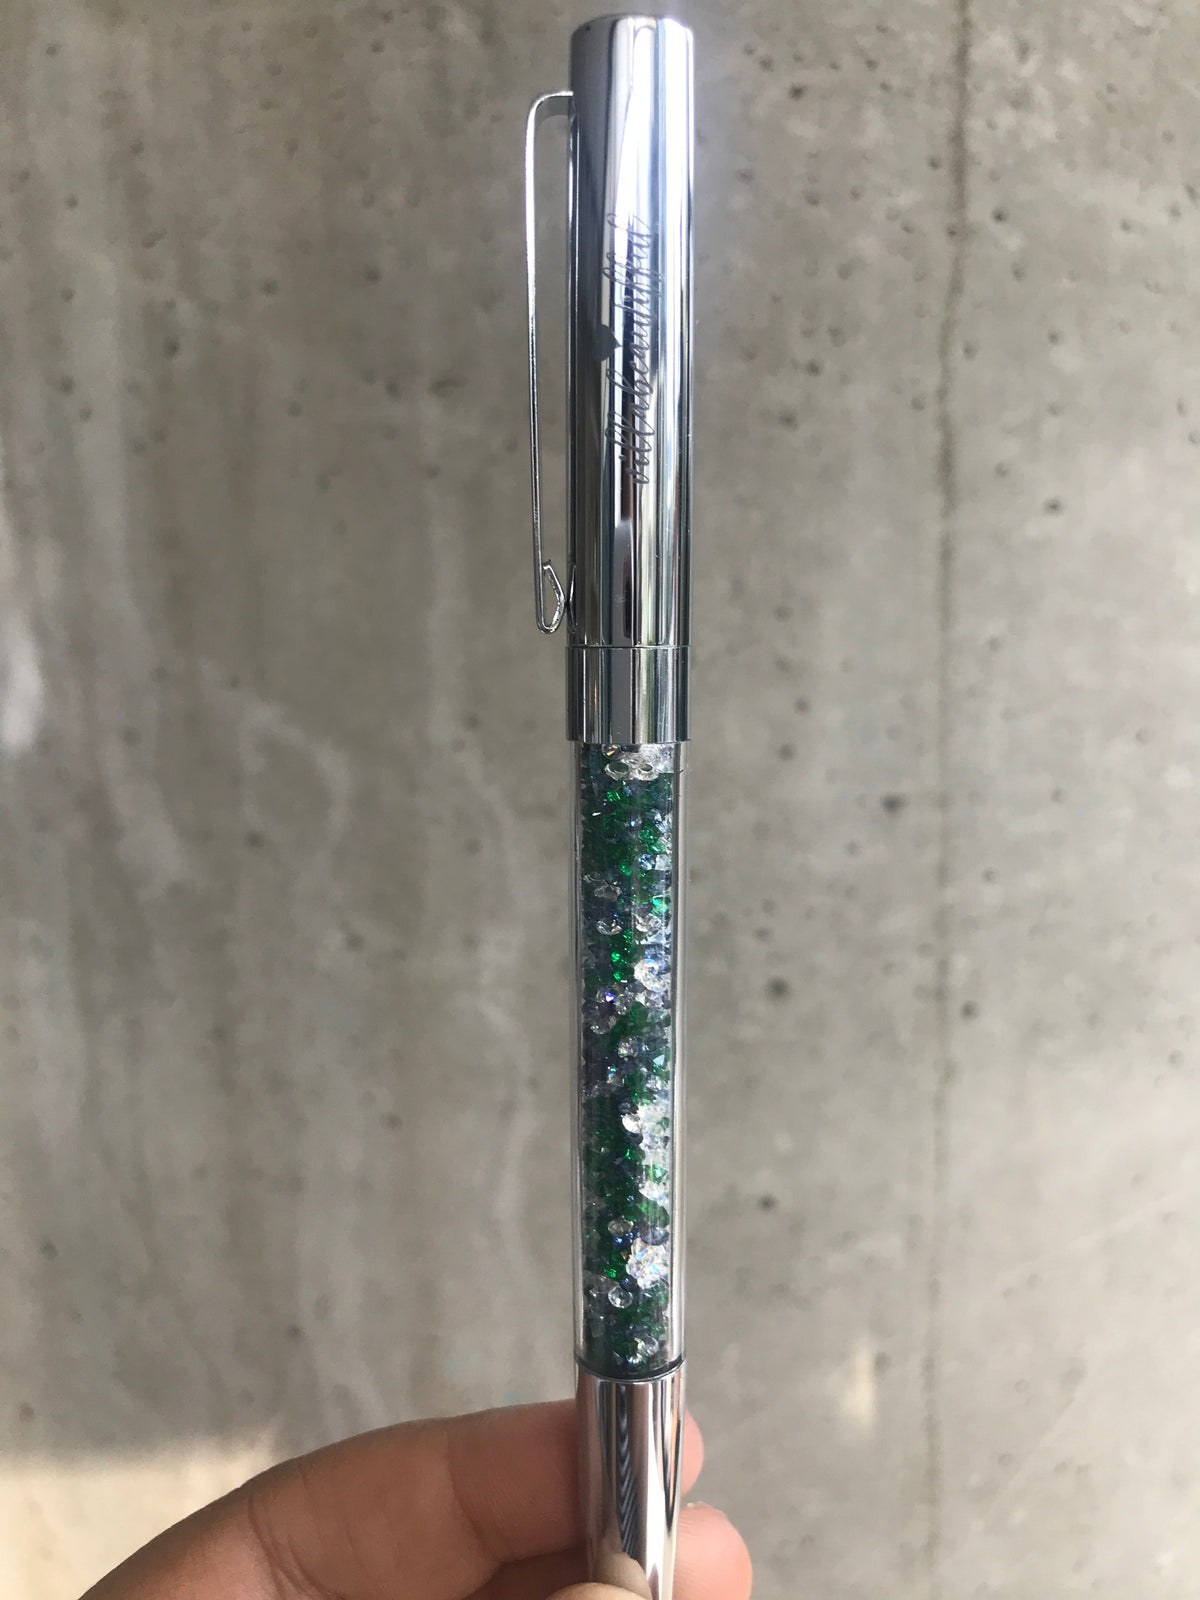 Sea-Gal Imperfect Crystal VBPen | limited pen